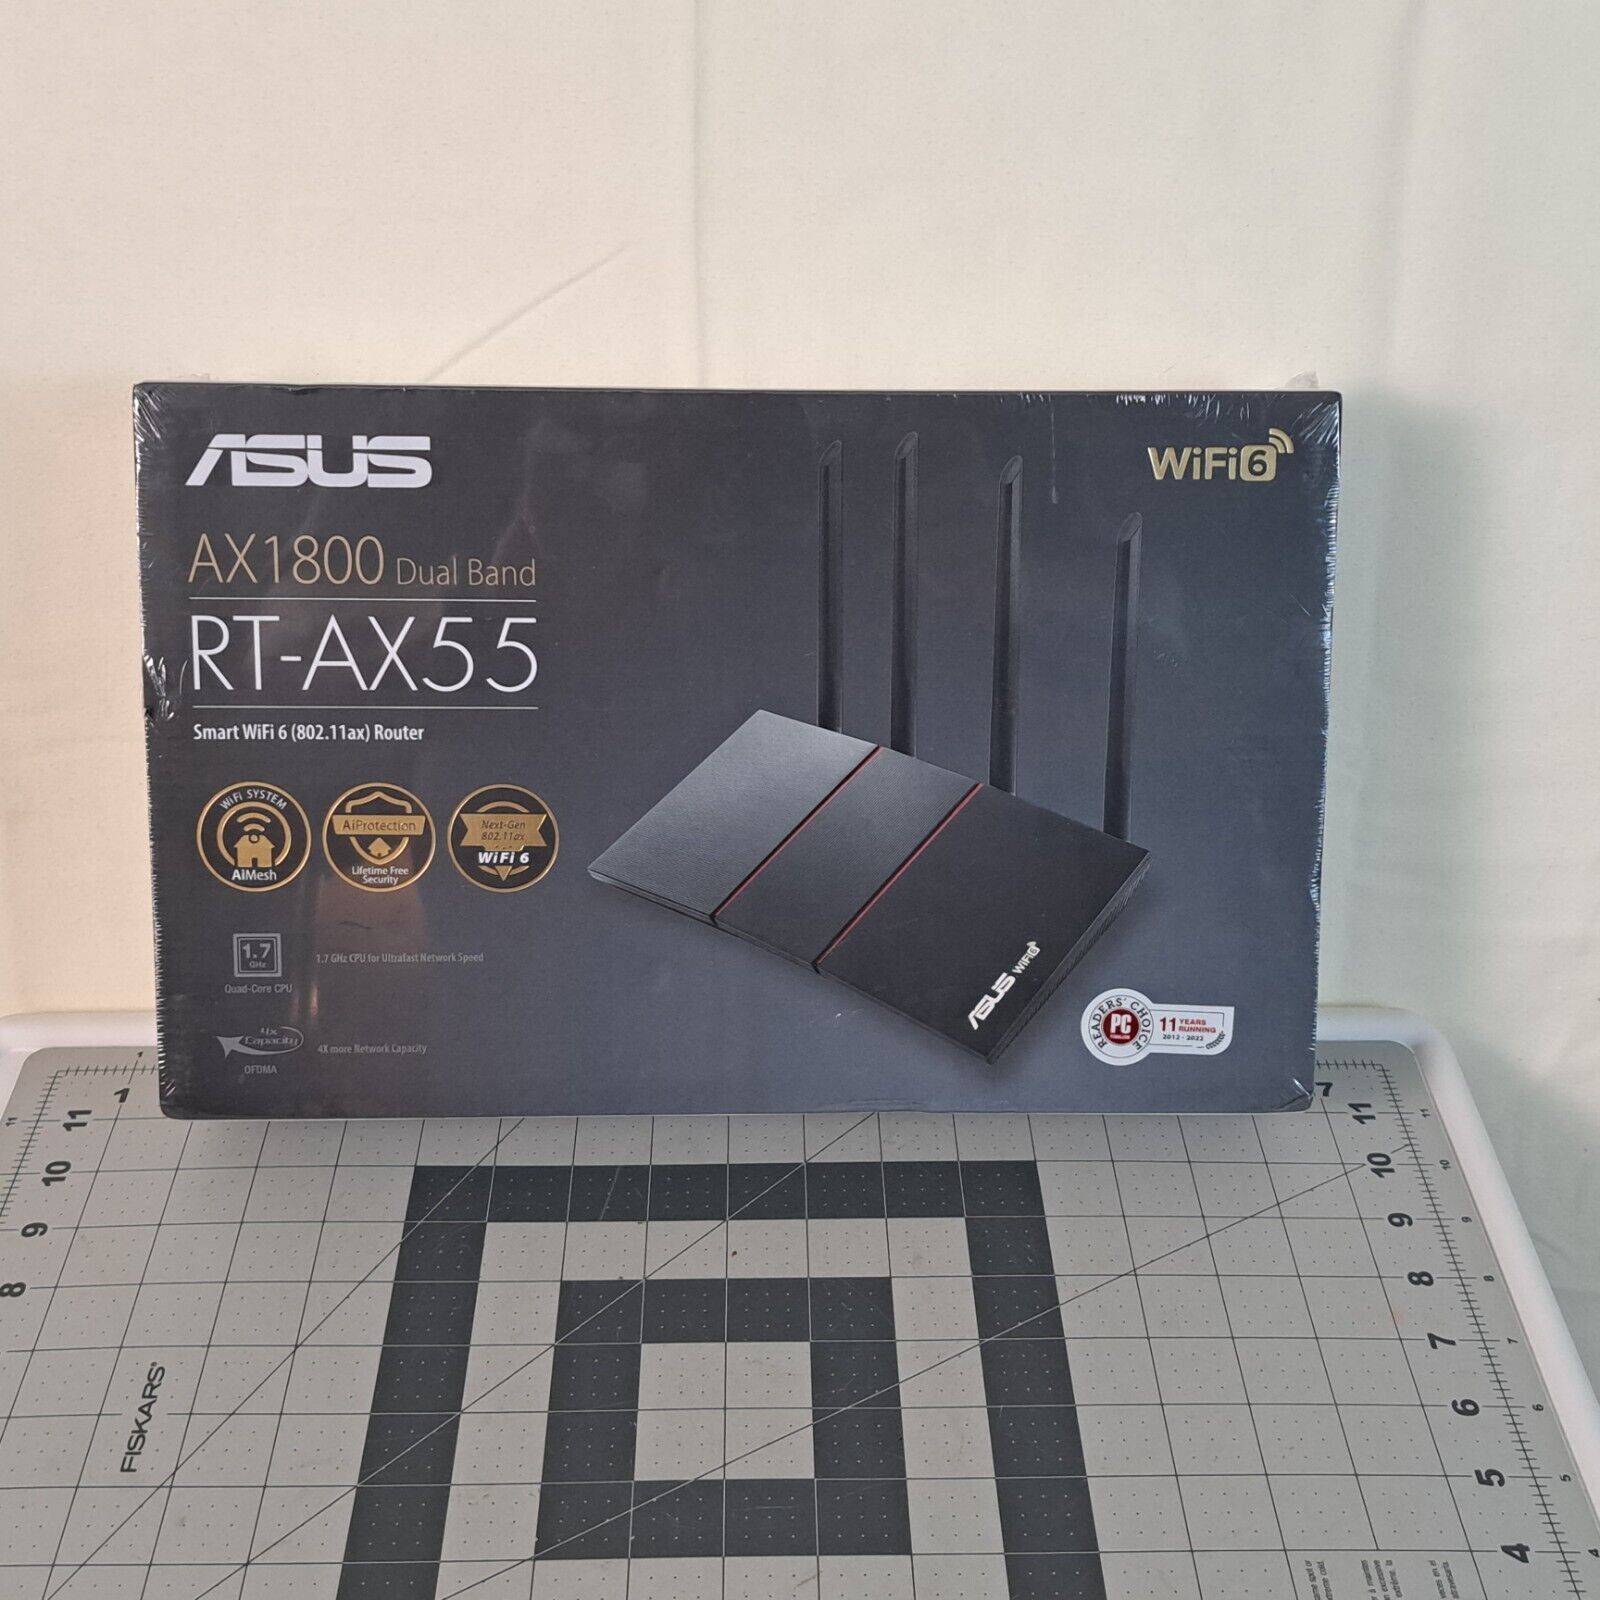 ASUS RT-AX55 AX1800 Dual-Band WiFi 6 Wireless Router new Network